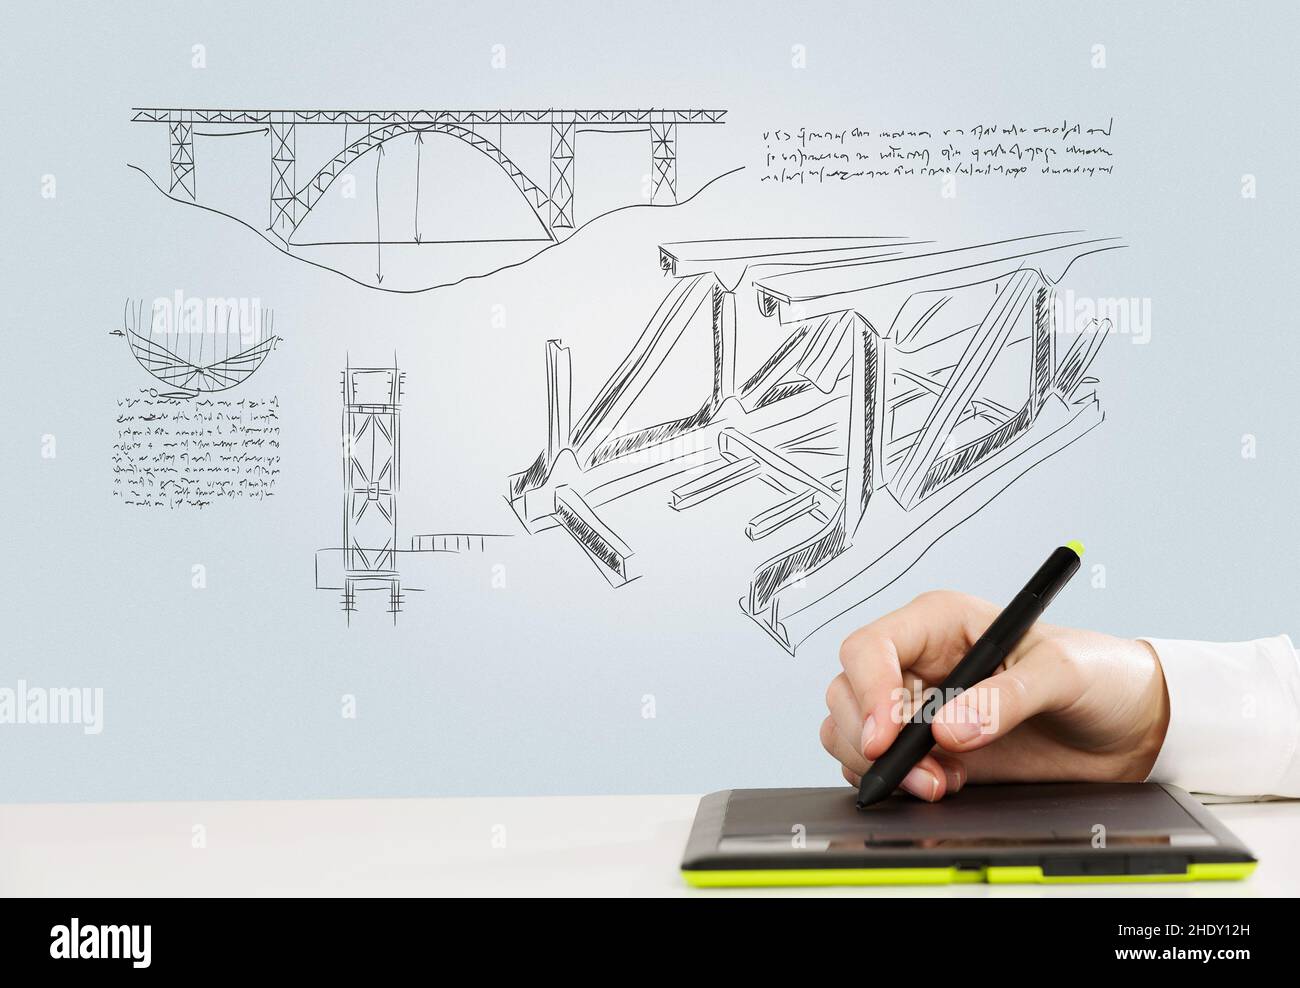 design, drawing, architect, draft, graphics tablet, designs, architects, drafts, graphics tablets Stock Photo